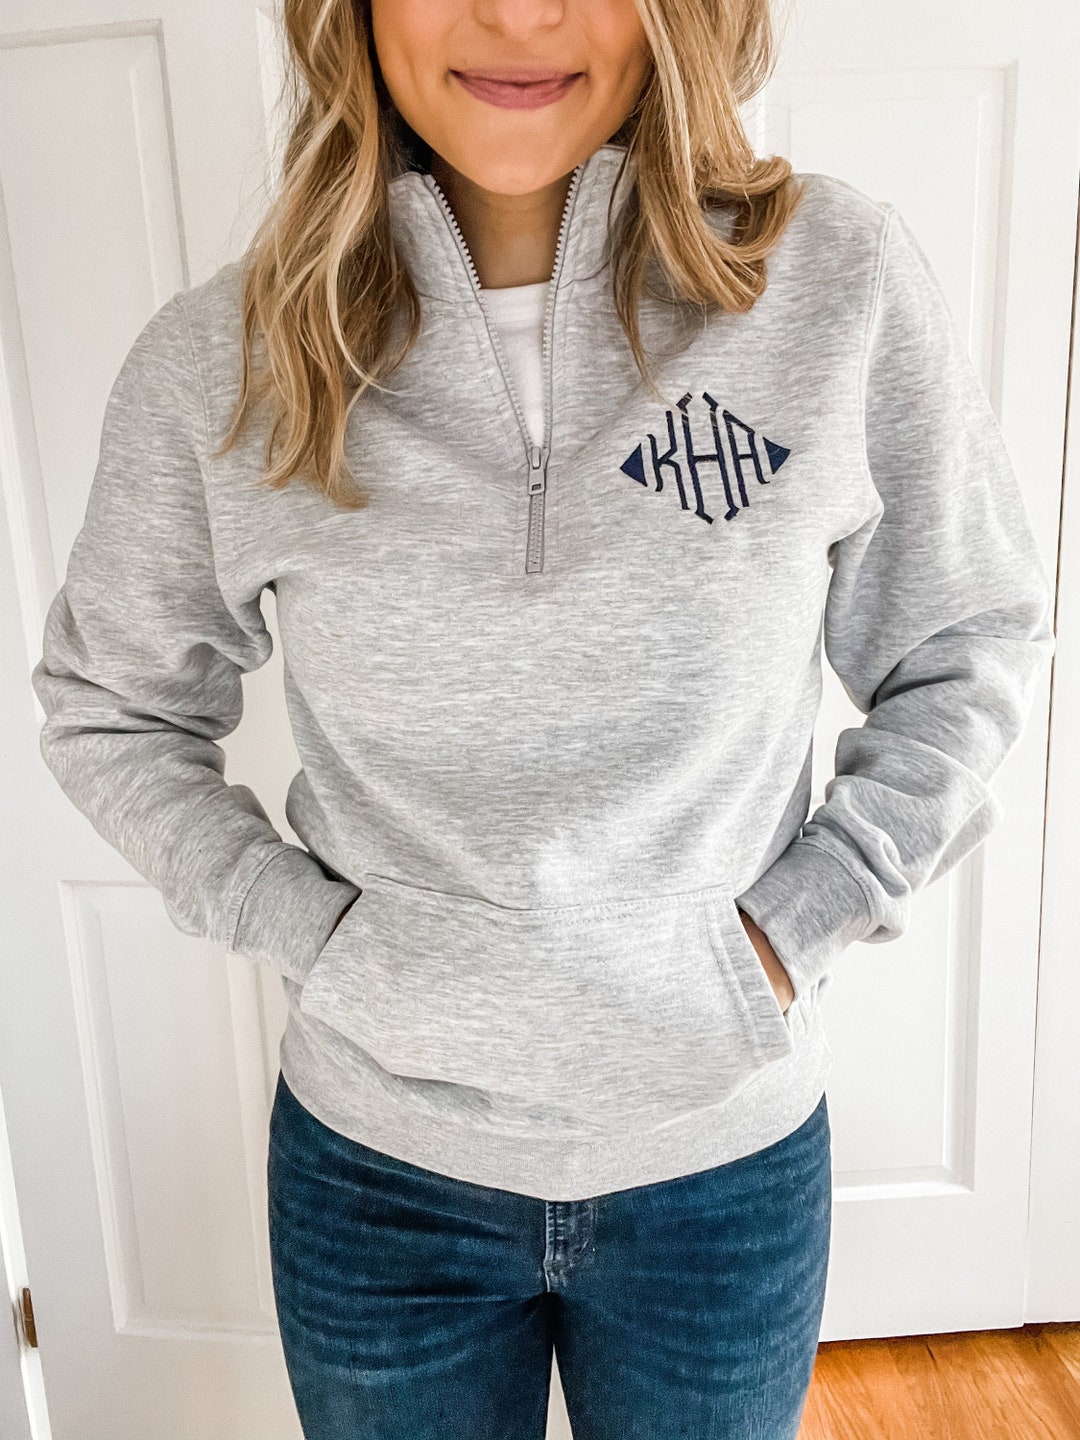 SEmbroideredBoutique Monogram Pullover with Front Pocket | Personalized Quarter Zip Sweatshirt with Pockets | Monogram Popover Bennett